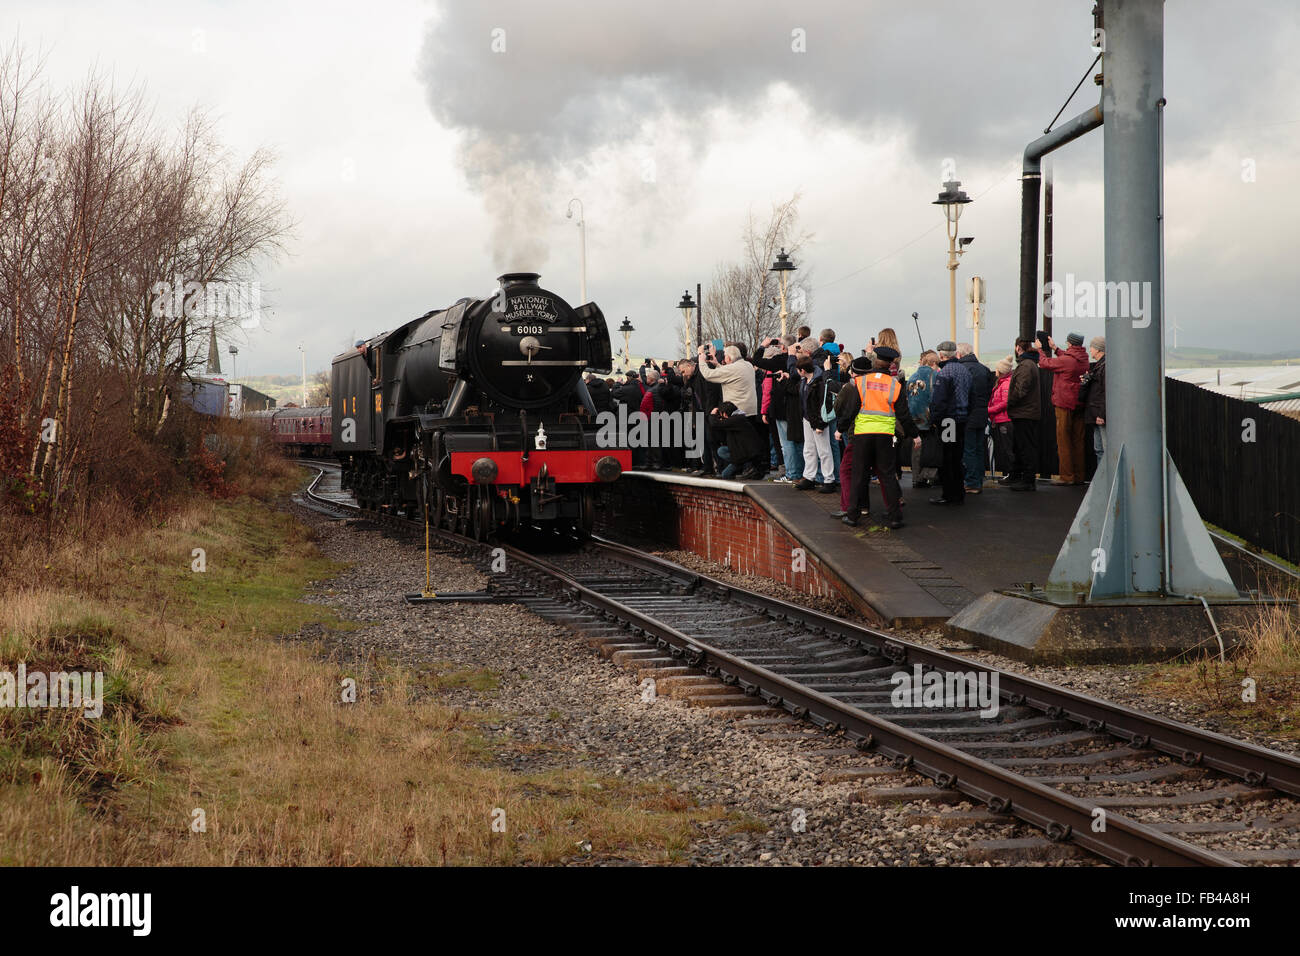 Heywood, Lancashire, UK. 9th January, 2016. Crowds around the Flying Scotsman on its arrival 1 hour late in Heywood, Lancashire on its maiden passenger run after restoration in Bury. 9th January 2014 Heywood, UK Credit:  Alan Ryder/Alamy Live News Stock Photo